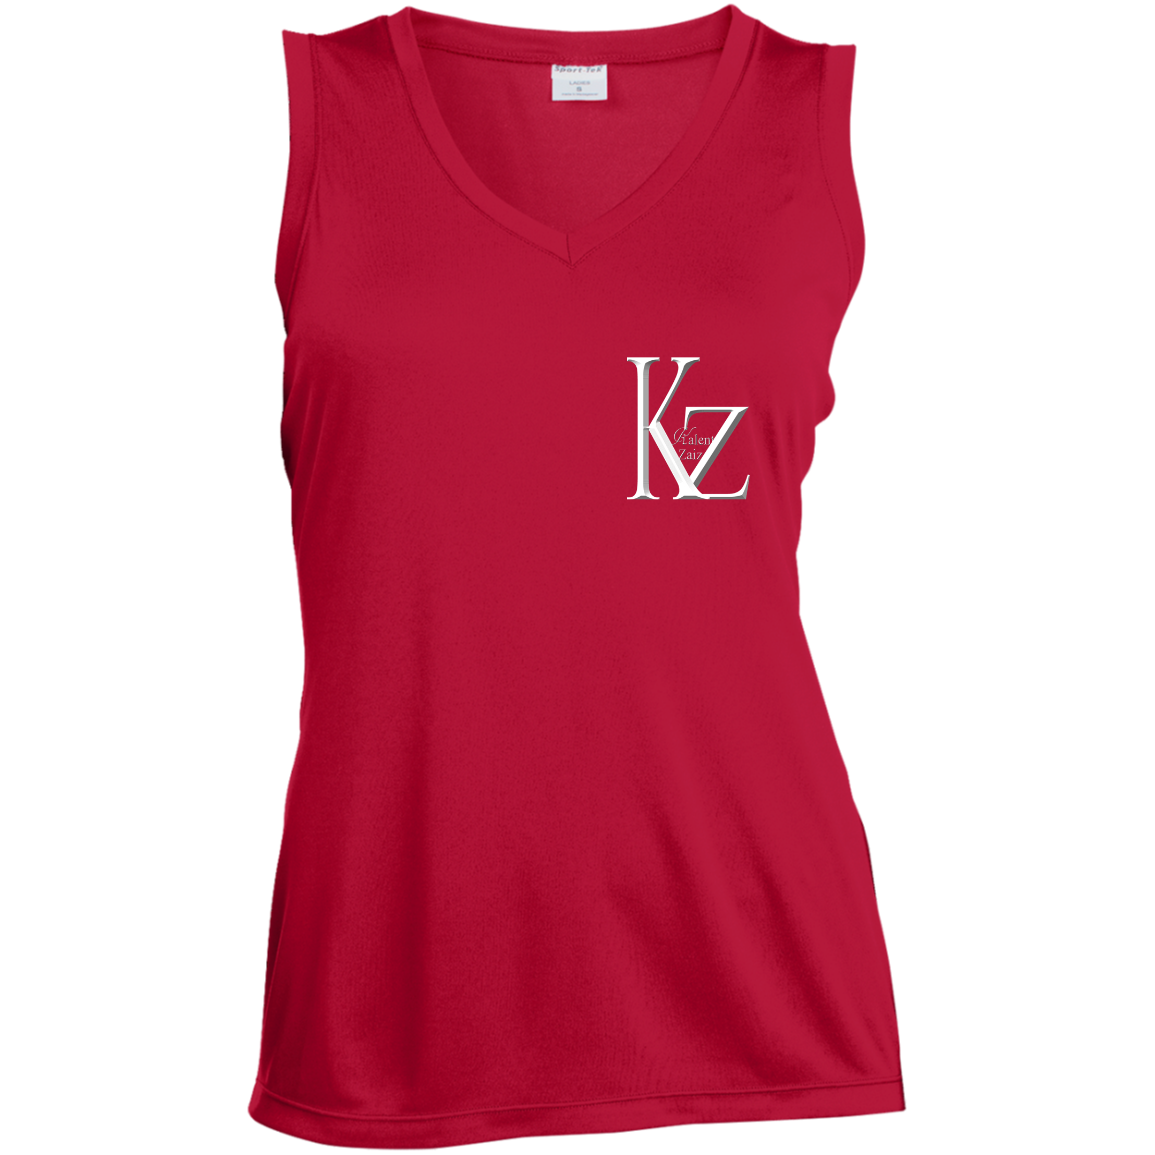 Kalent Zaiz Red LST352 Ladies' Sleeveless Moisture Absorbing V-Neck  3.8-ounce, 100% polyester interlock with PosiCharge technology Gently contoured silhouette Double-needle armholes and hem Decoration type: Digital Print